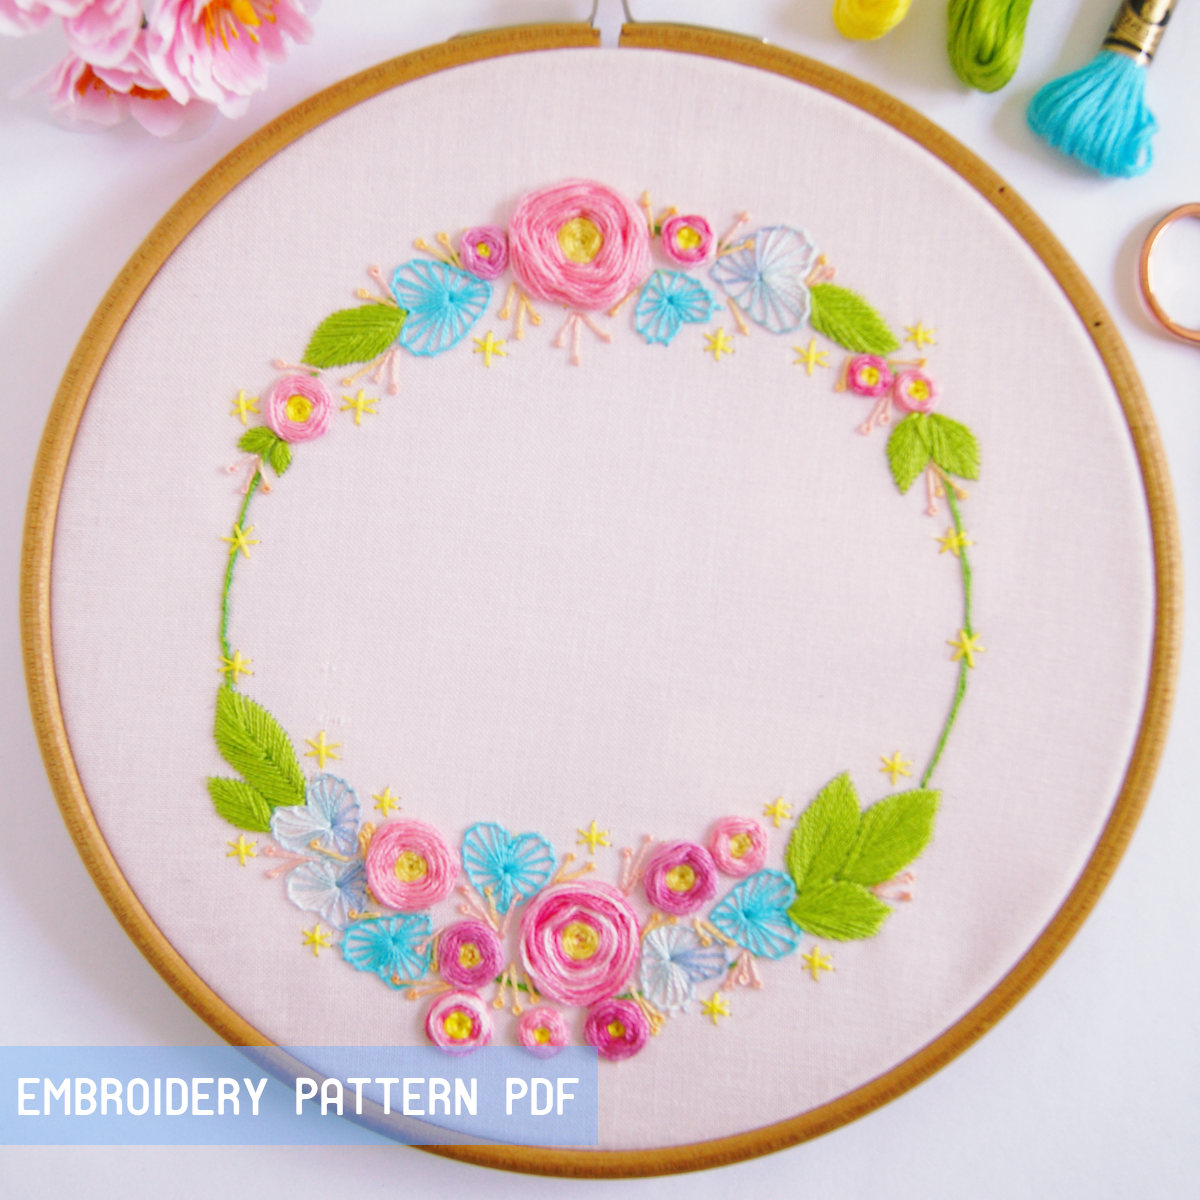 Cool Embroidery Patterns Polka Bloom Happy Embroidery Patterns For You